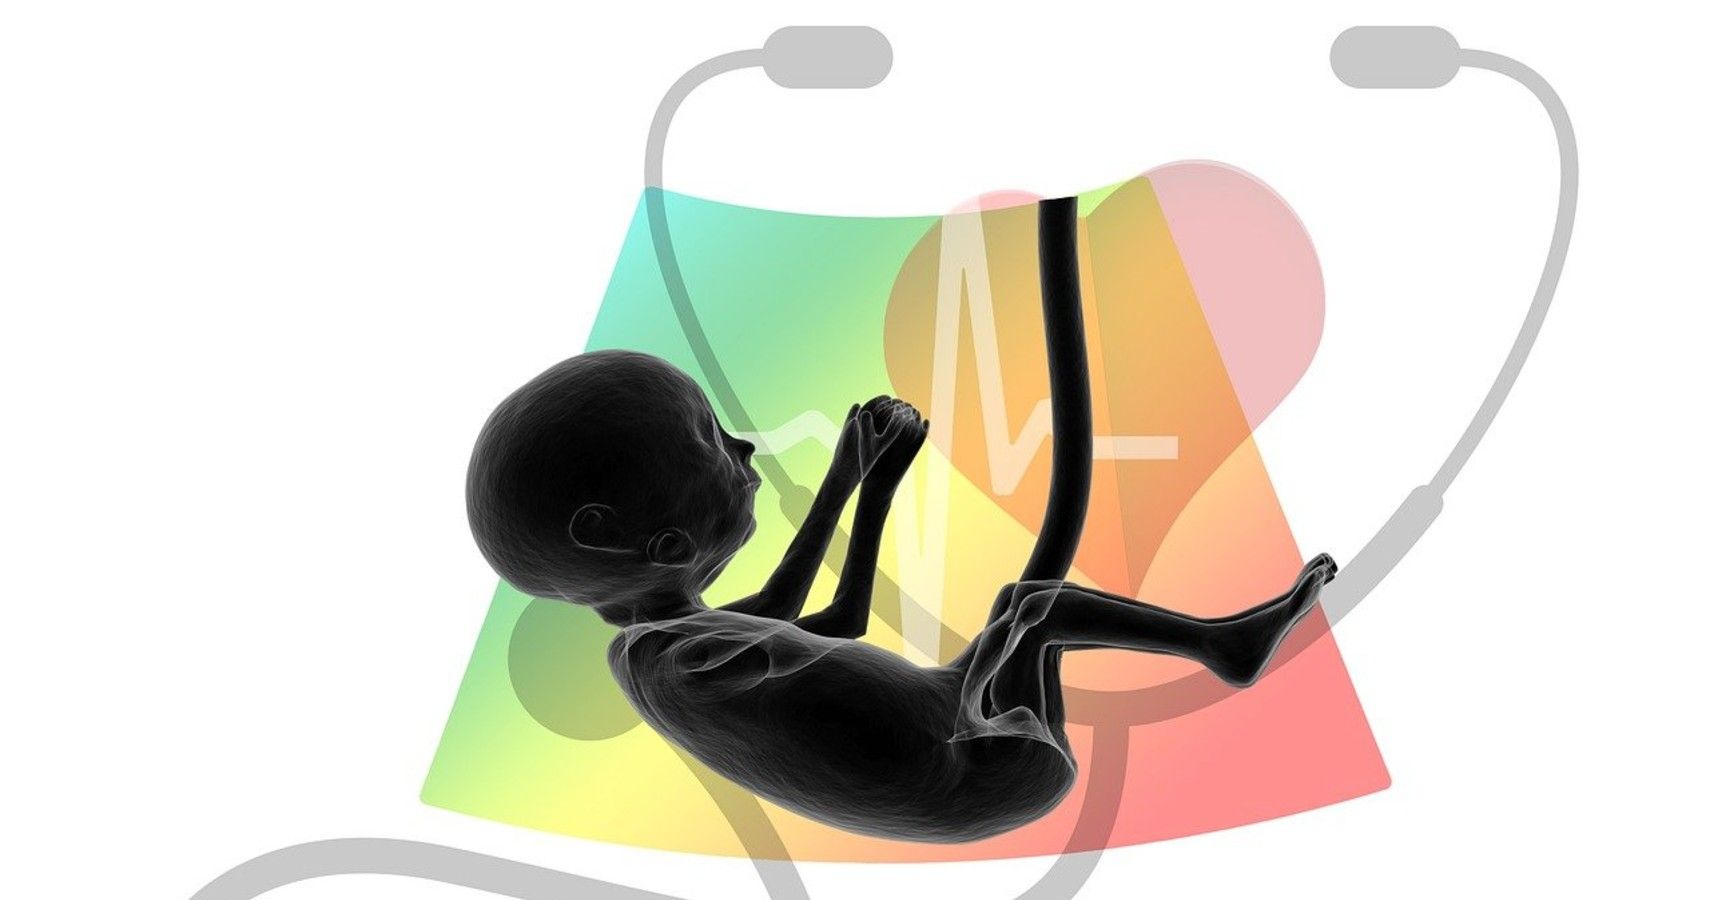 Virtual Placenta Helps Detect Fetal Growth Issues